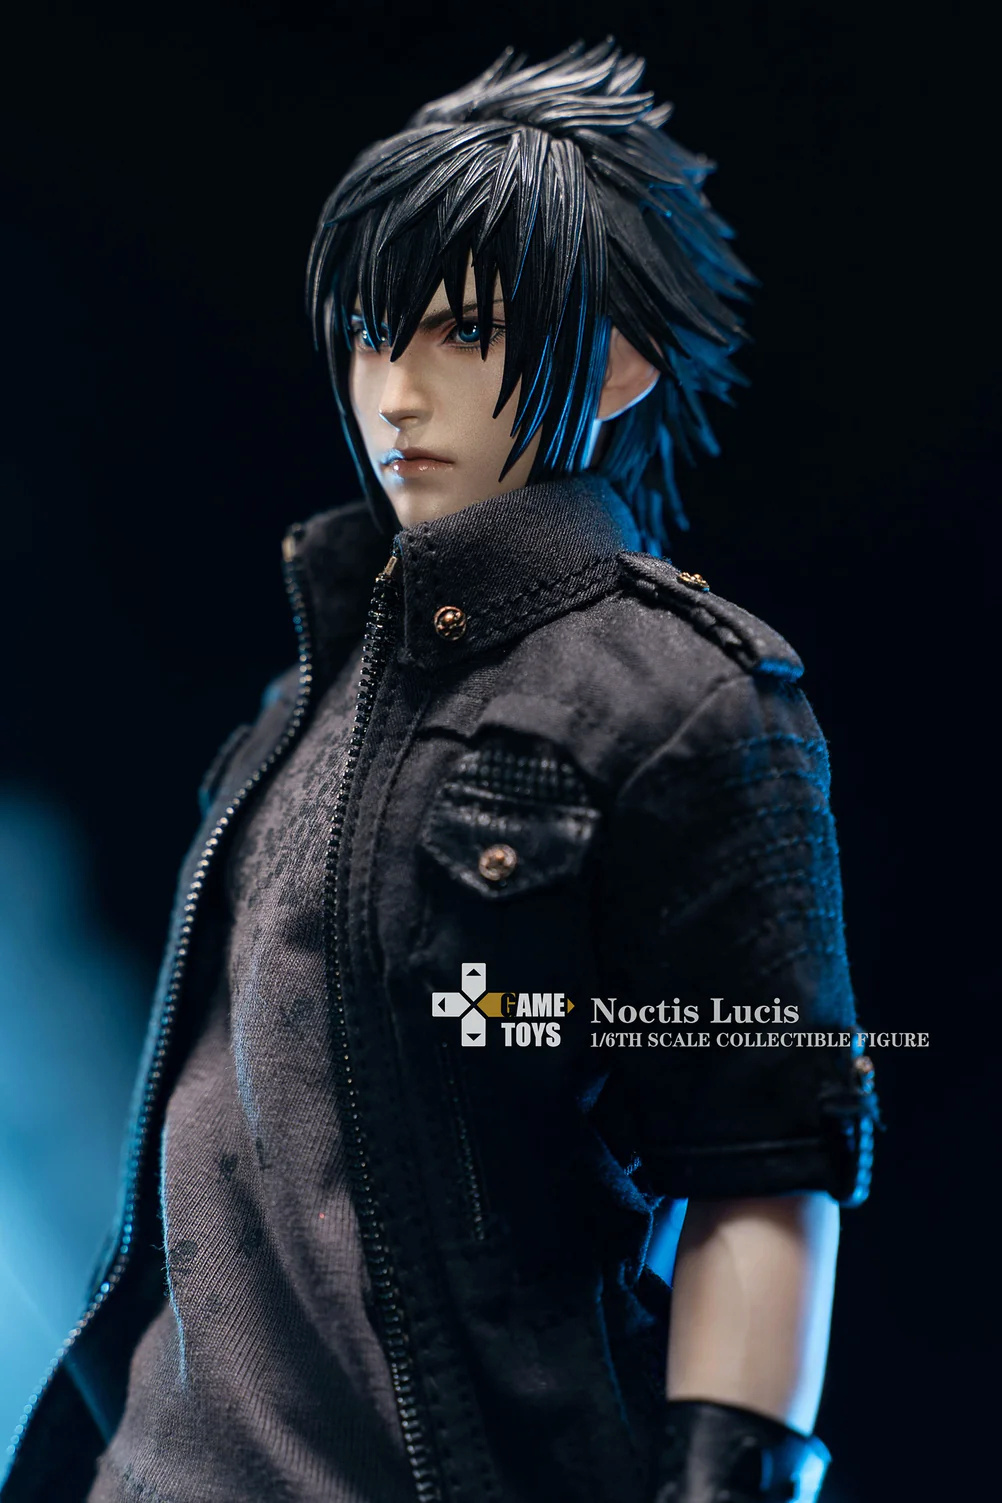 NEW PRODUCT: Gametoys Noctis Lucis, additional accessories, and throne 16_web10